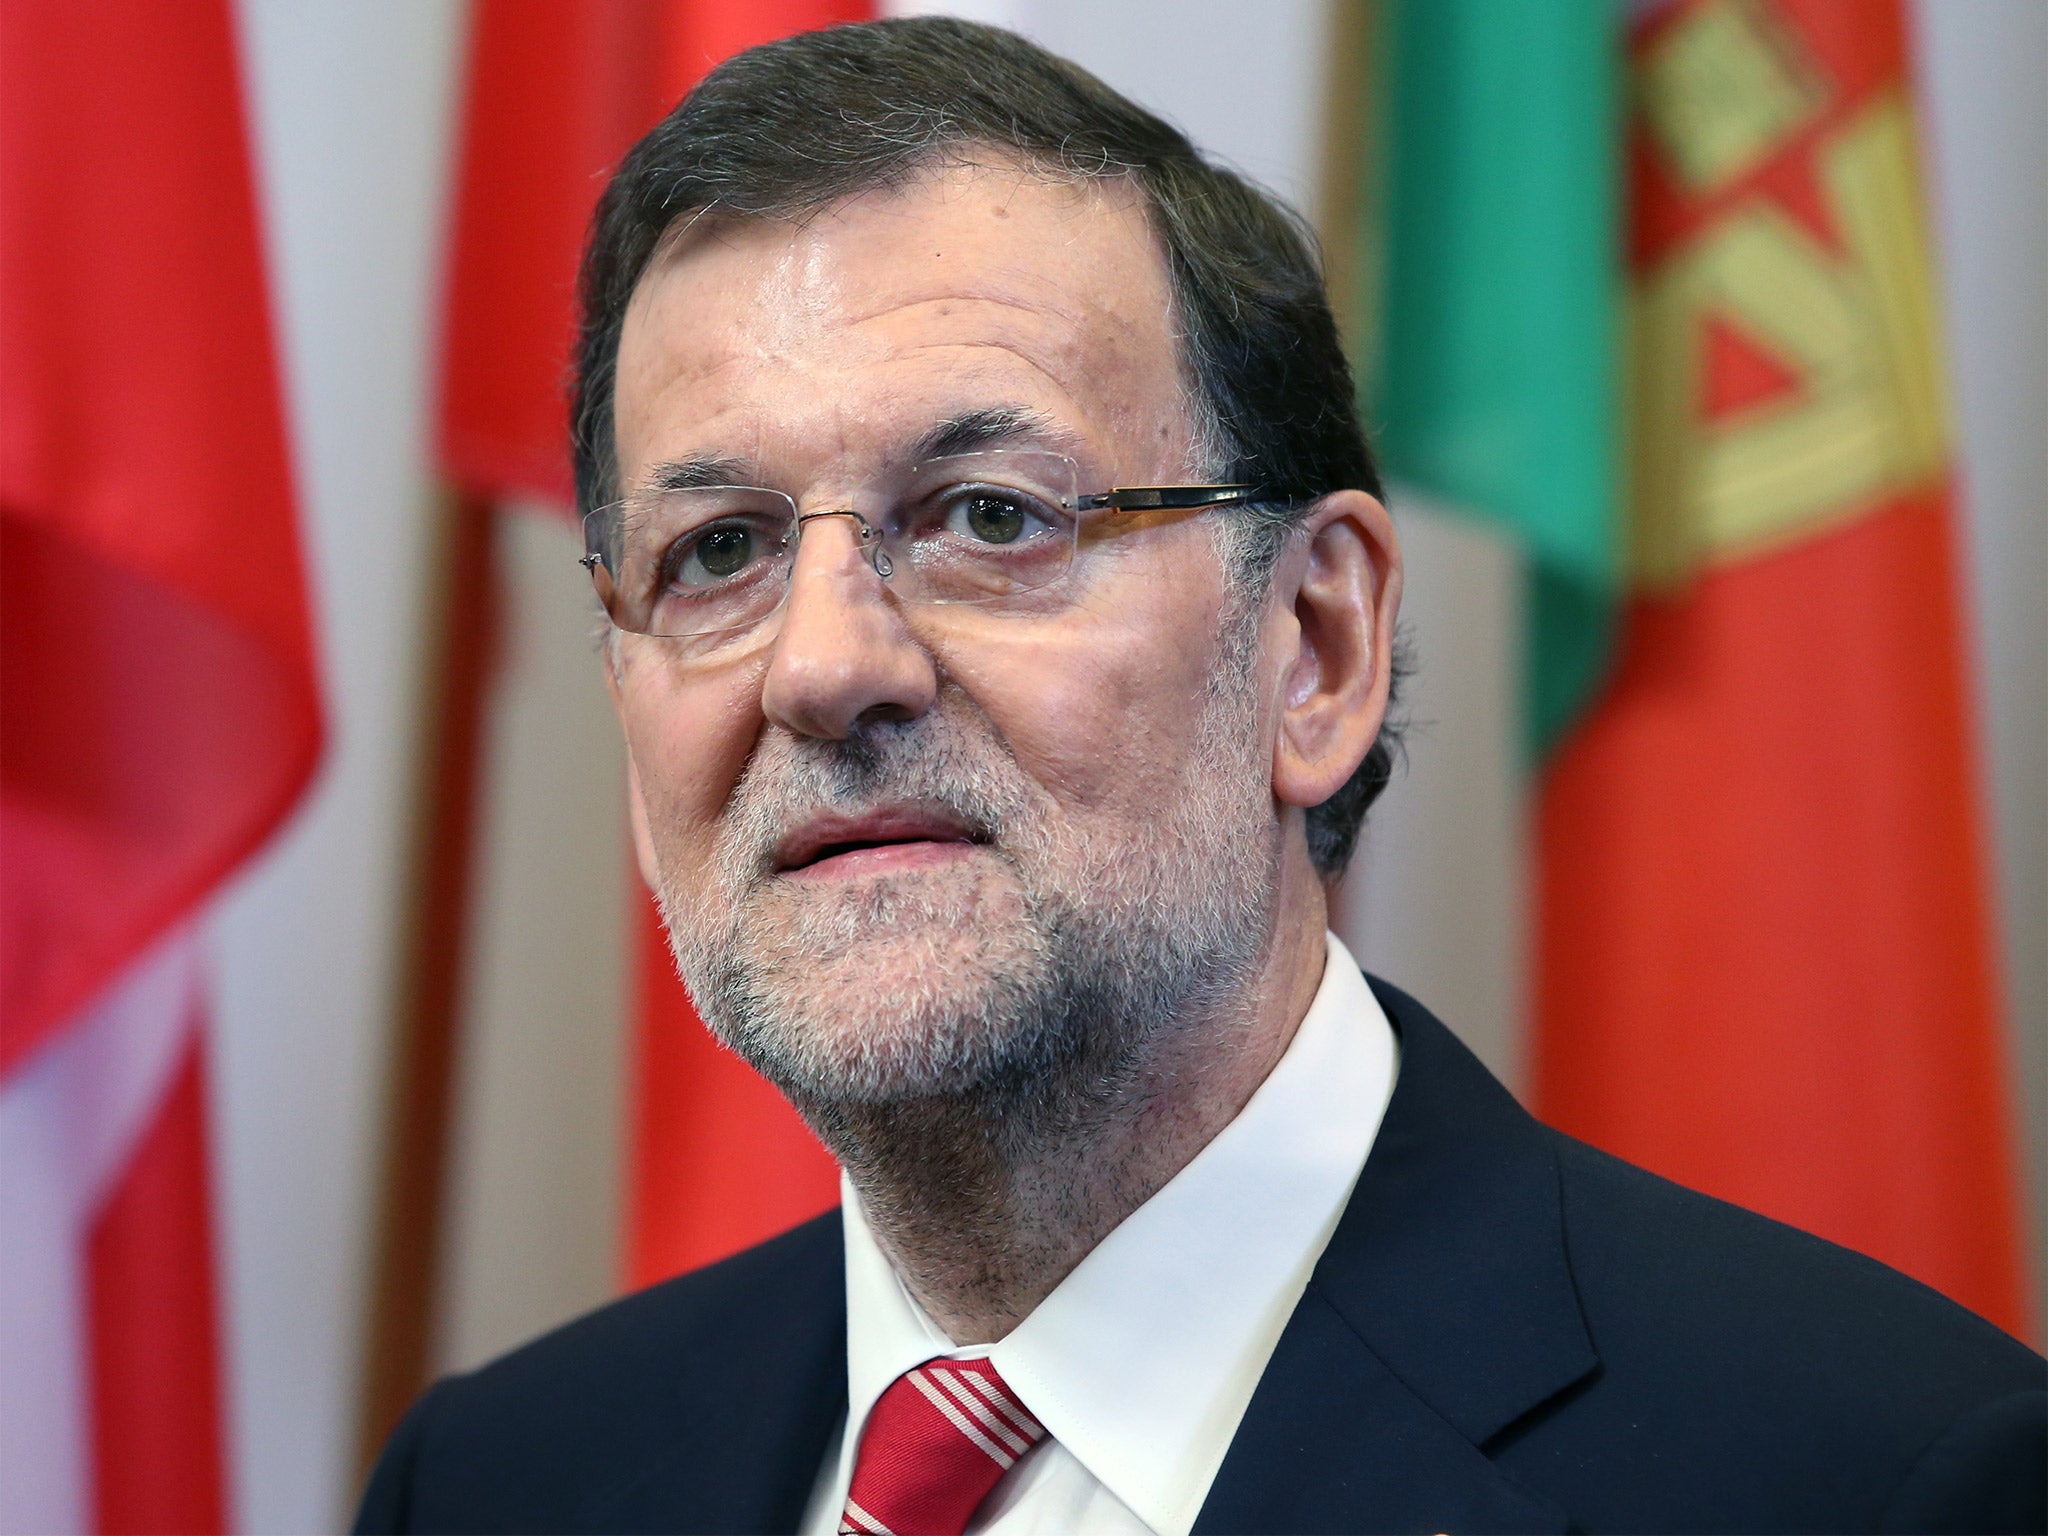 Mariano Rajoy insisted that the scandals facing his government are not indicative of the country